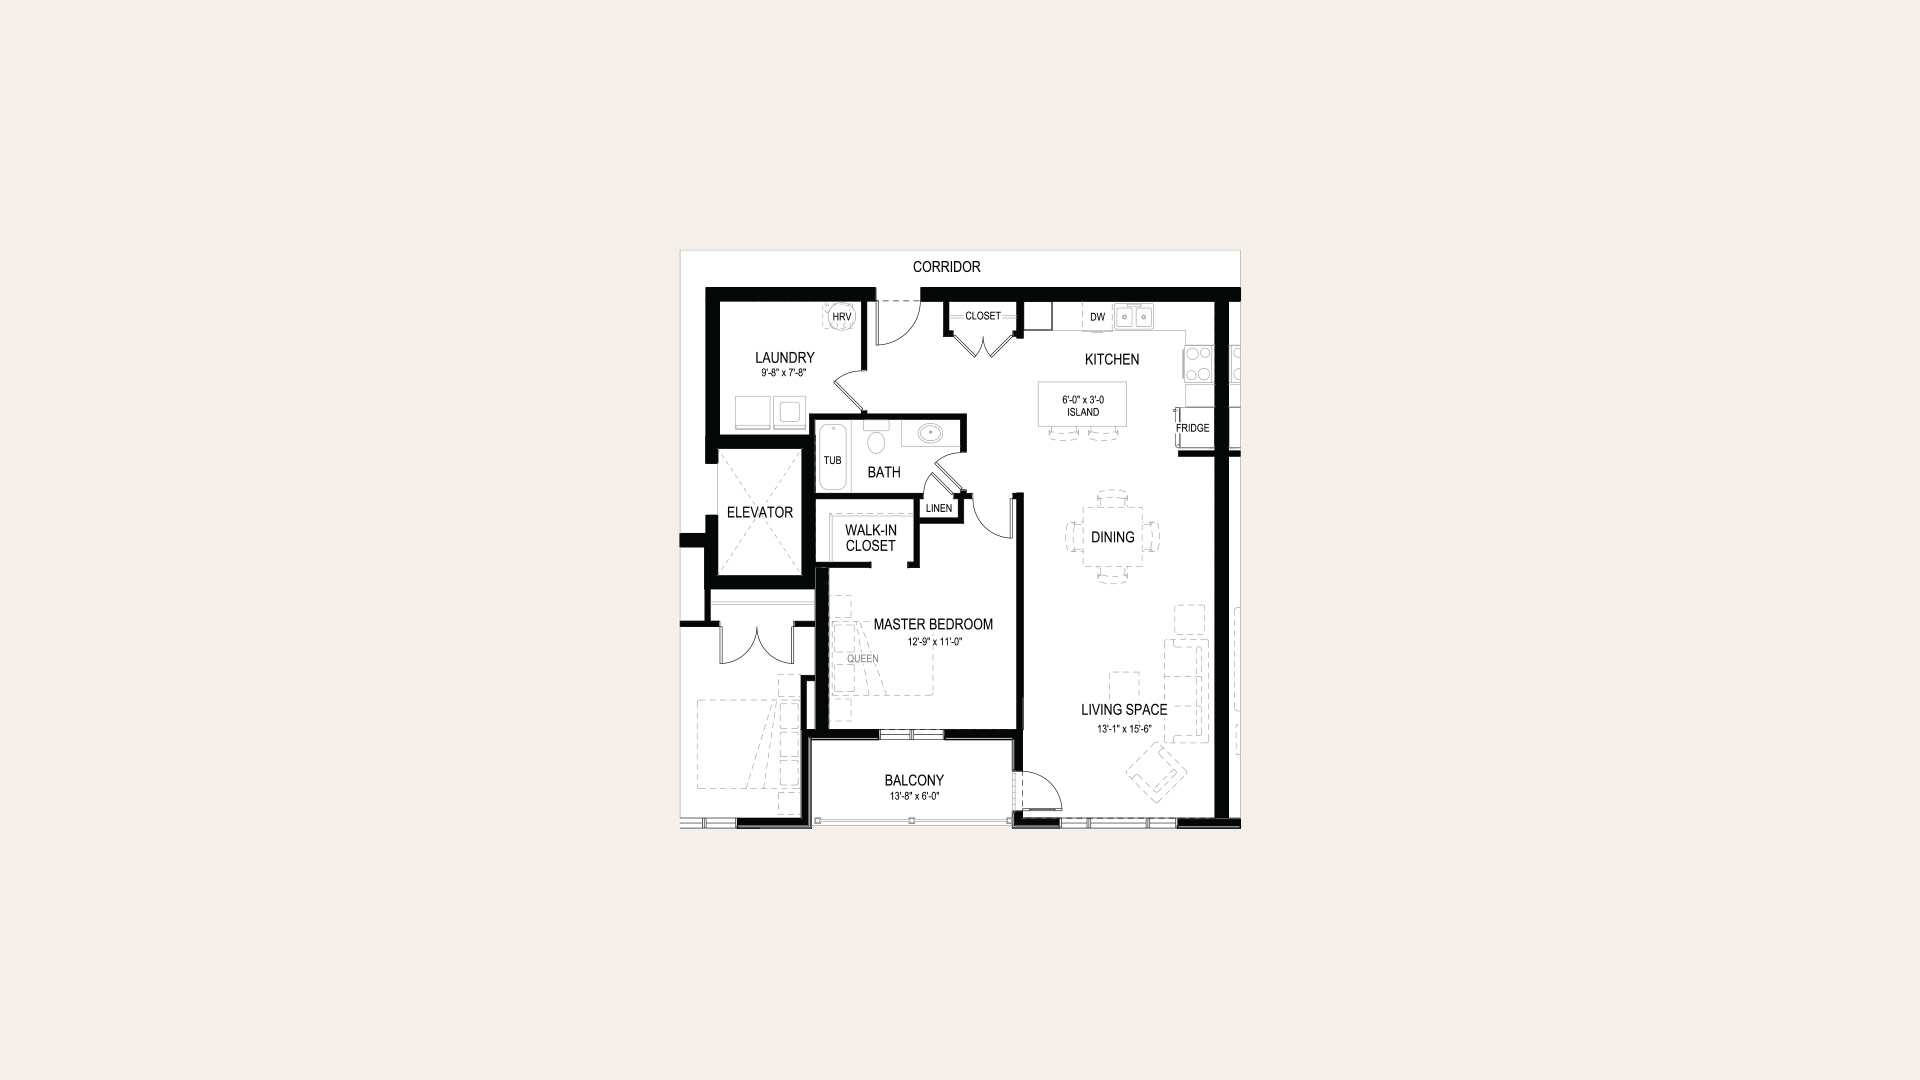 Floor plan of apartment F in Building C. One bedroom with a walk-in closet, one bathroom, laundry room, balcony, and an open concept kitchen and living room.